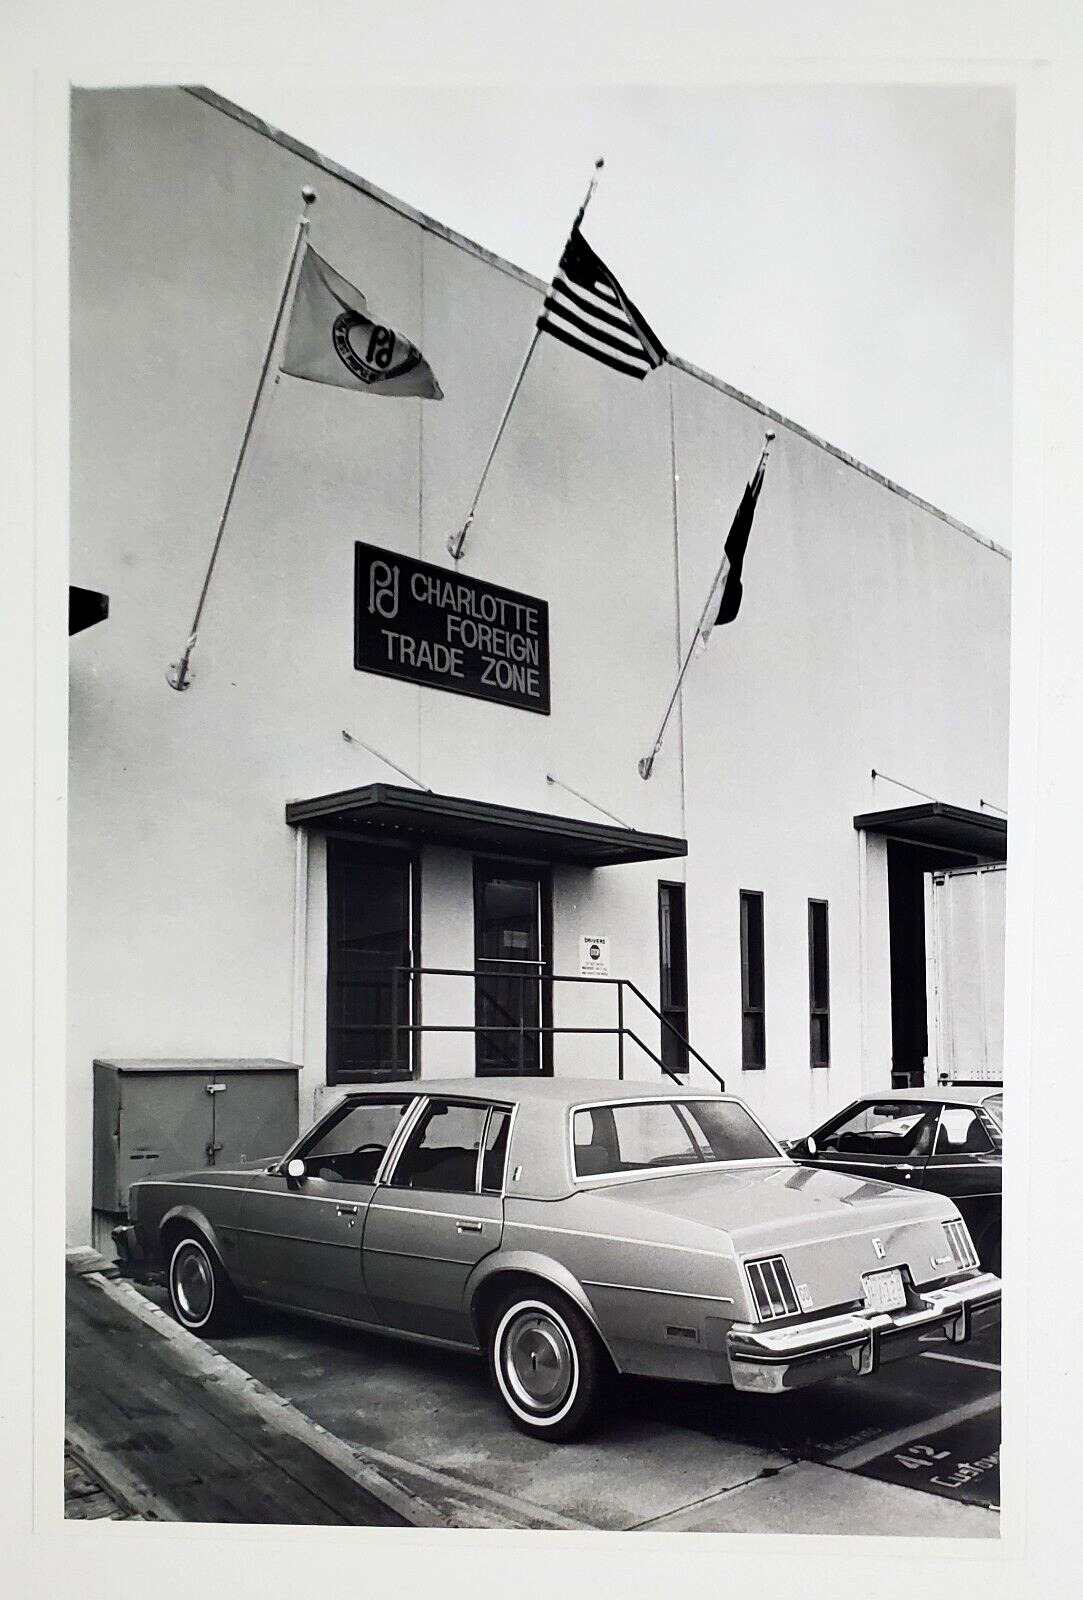 1981 Charlotte NC Foreign Trade Zone Building Oldsmobile Vintage Press Photo